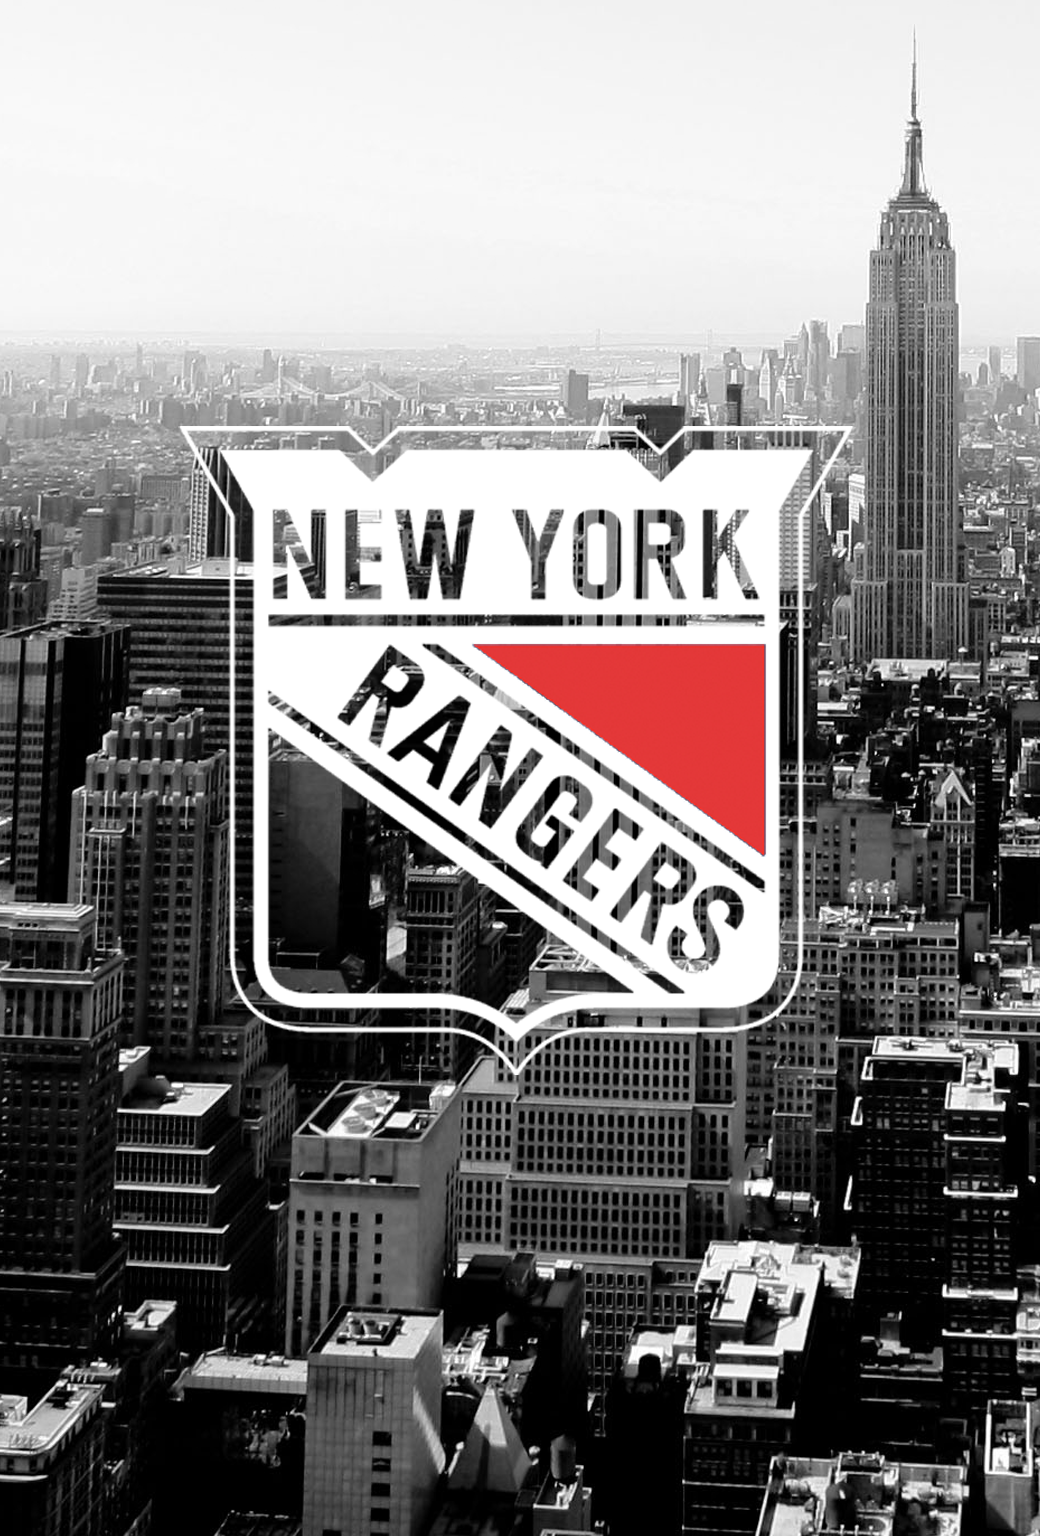 New York Rangers NYC skyline mobile wallpaper iPhone 4 or iPhone 5s 1040x1536